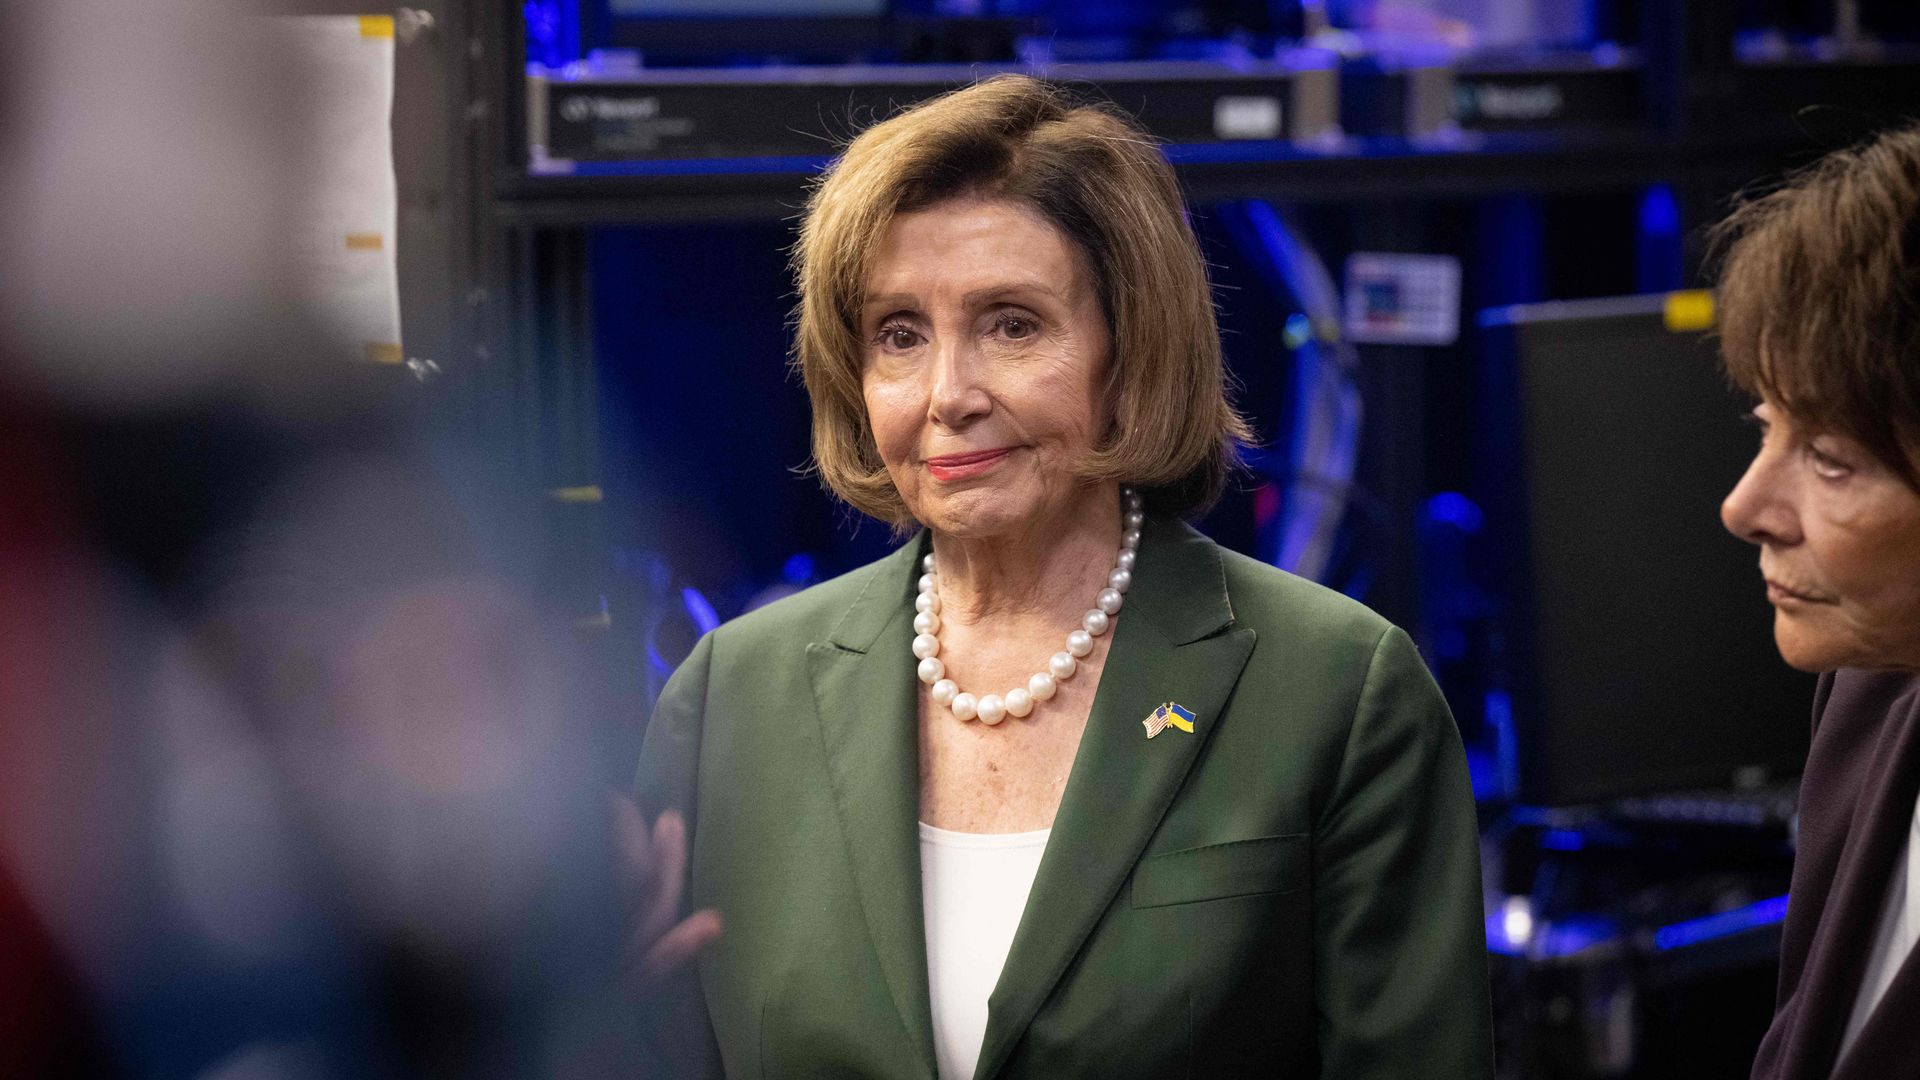 House Speaker Nancy Pelosi, wearing a green suit, white shirt and pearl necklace, at the National Accelerator Laboratory in California.